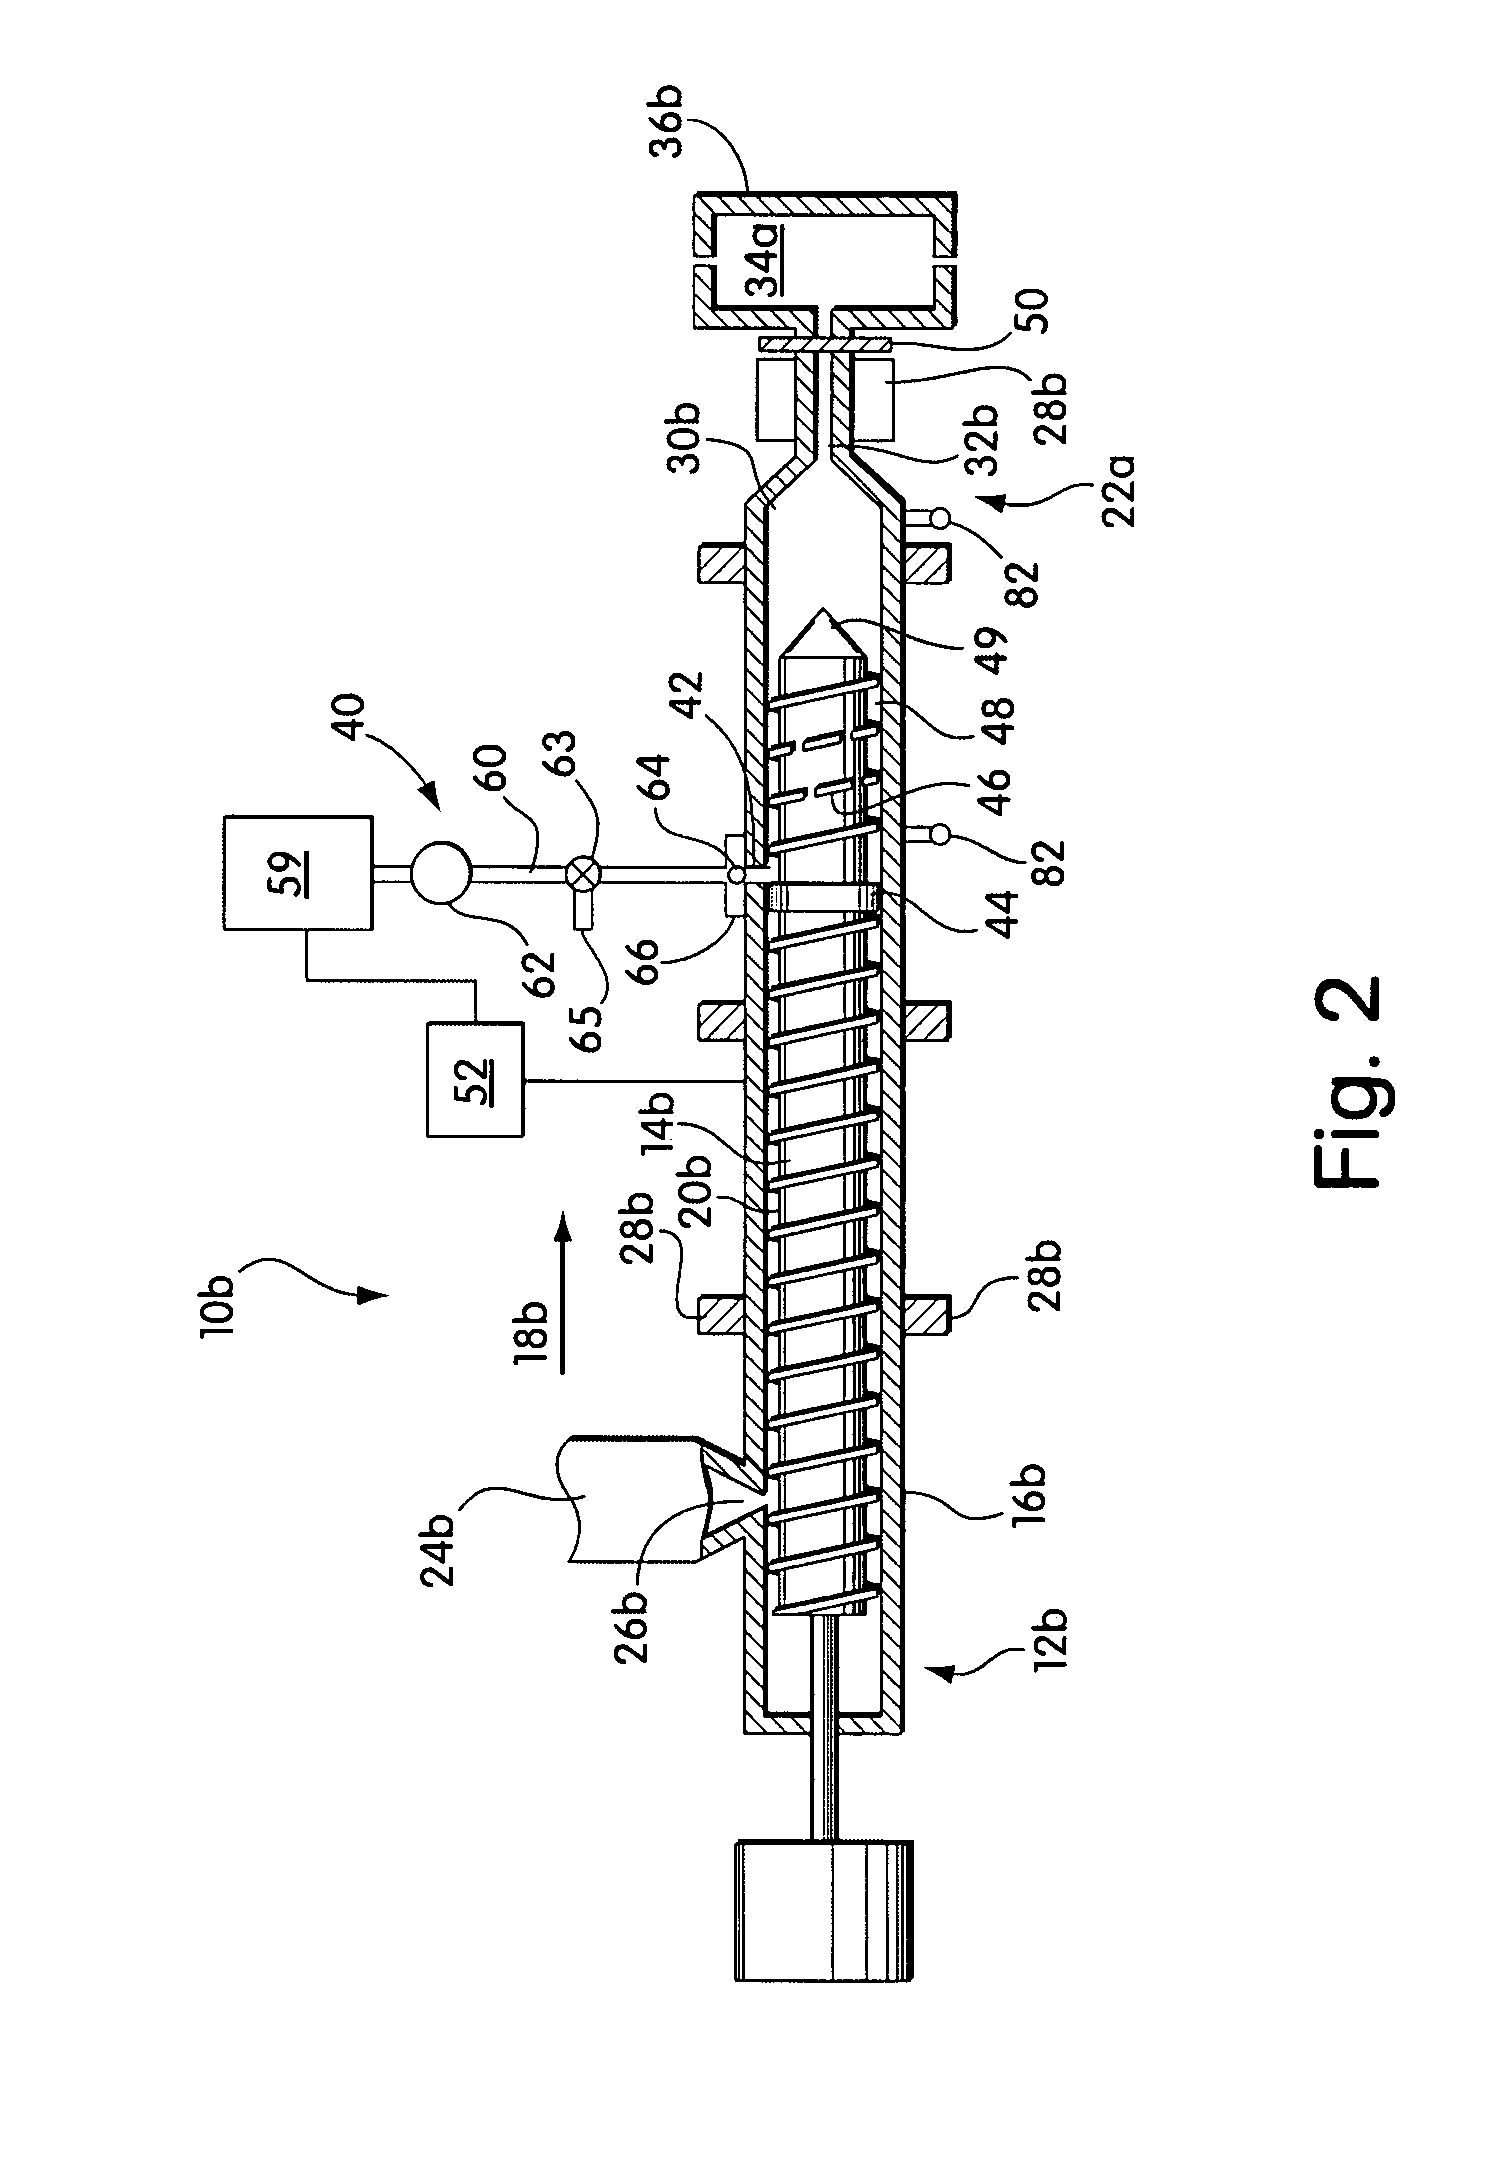 Polymer processing systems including screws